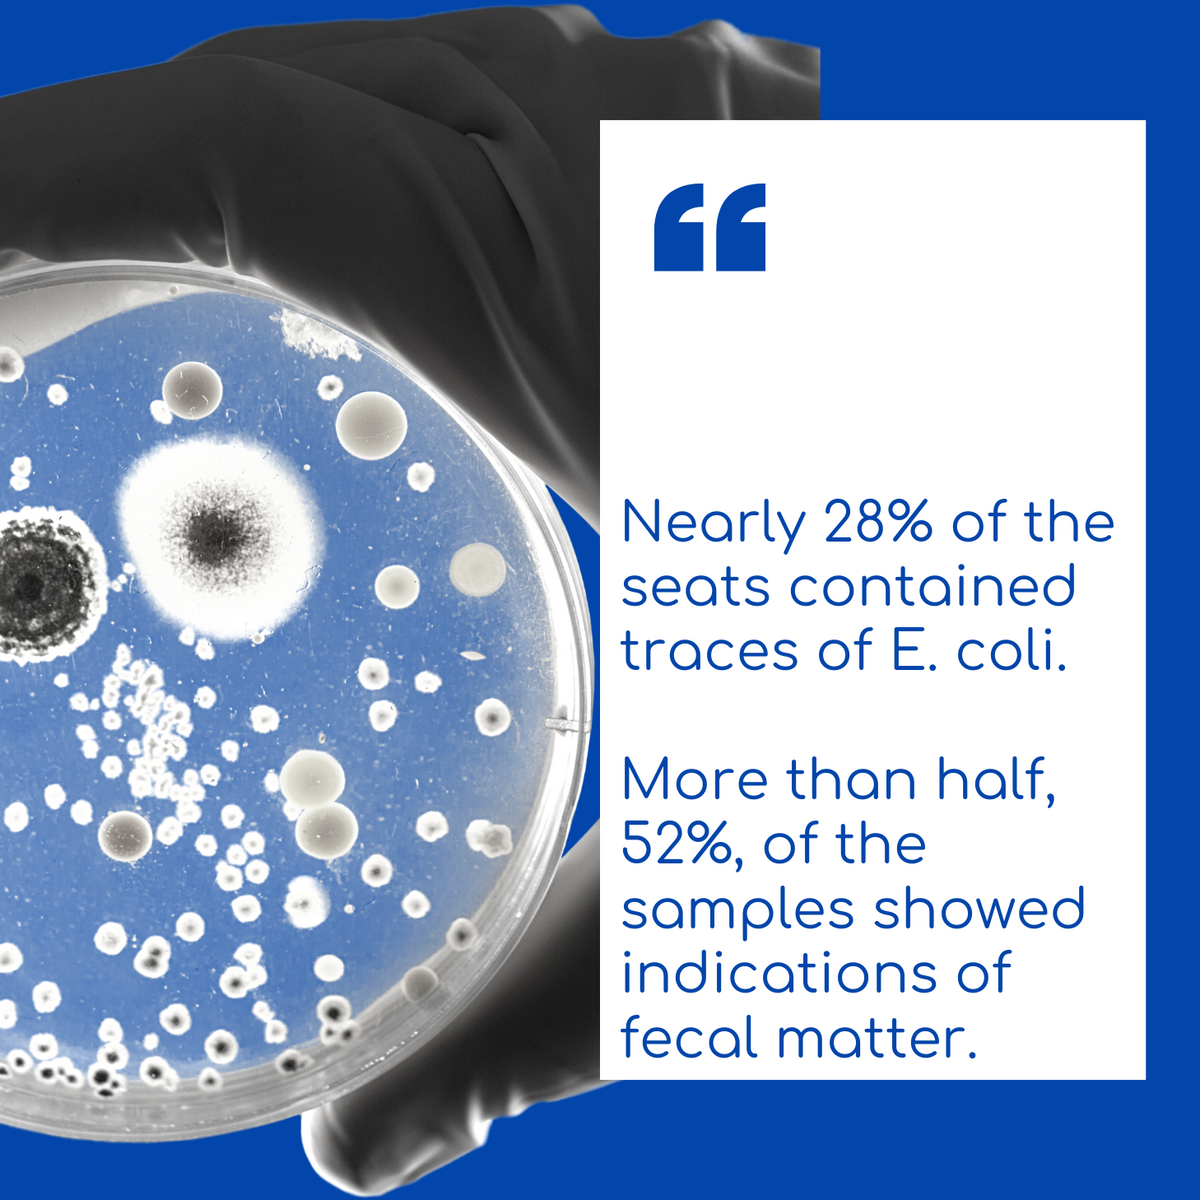 Nearly 28 percent of the seats contained traces of E. coli. More than half, 52 percent, of the samples showed indications of fecal matter.